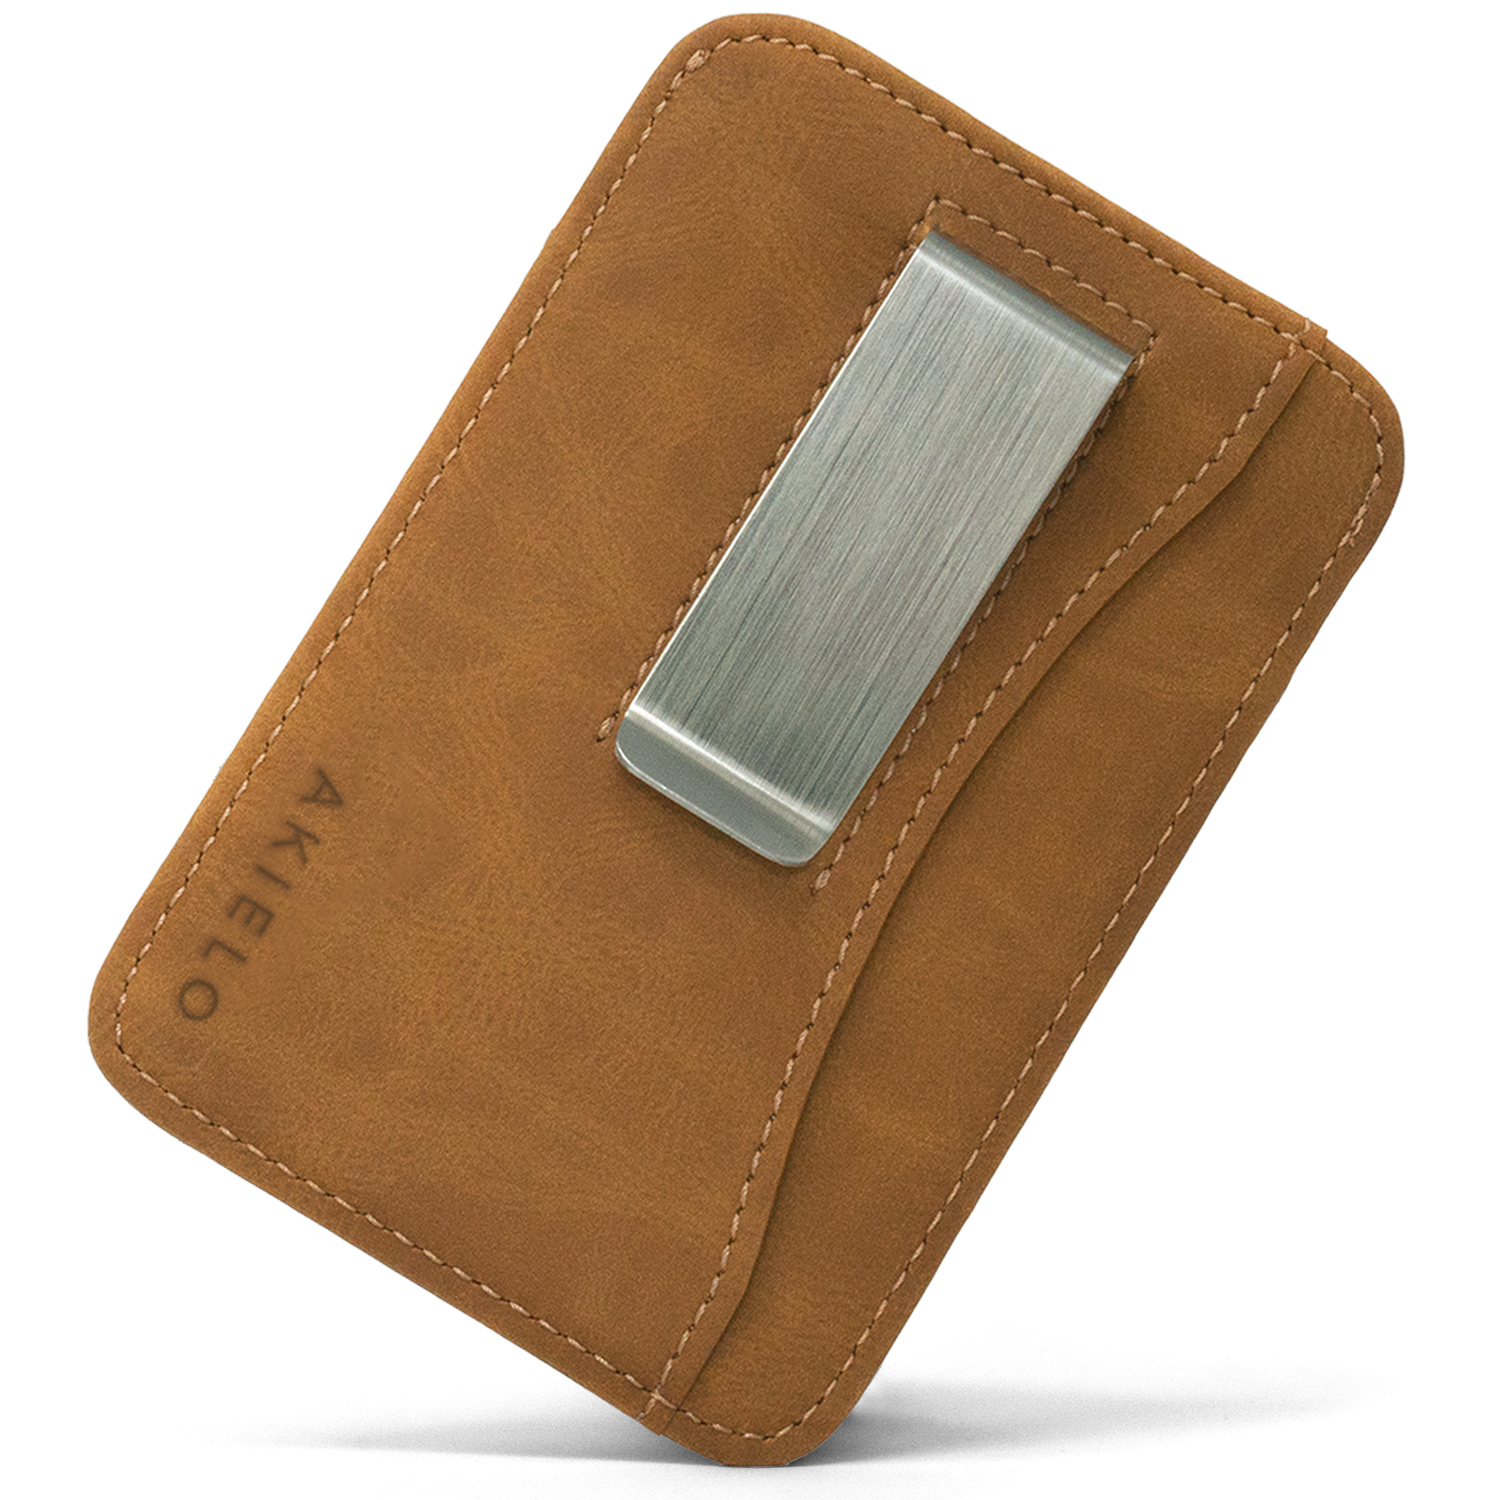 Tan RFID blocking credit card holder wallet with Money Clip